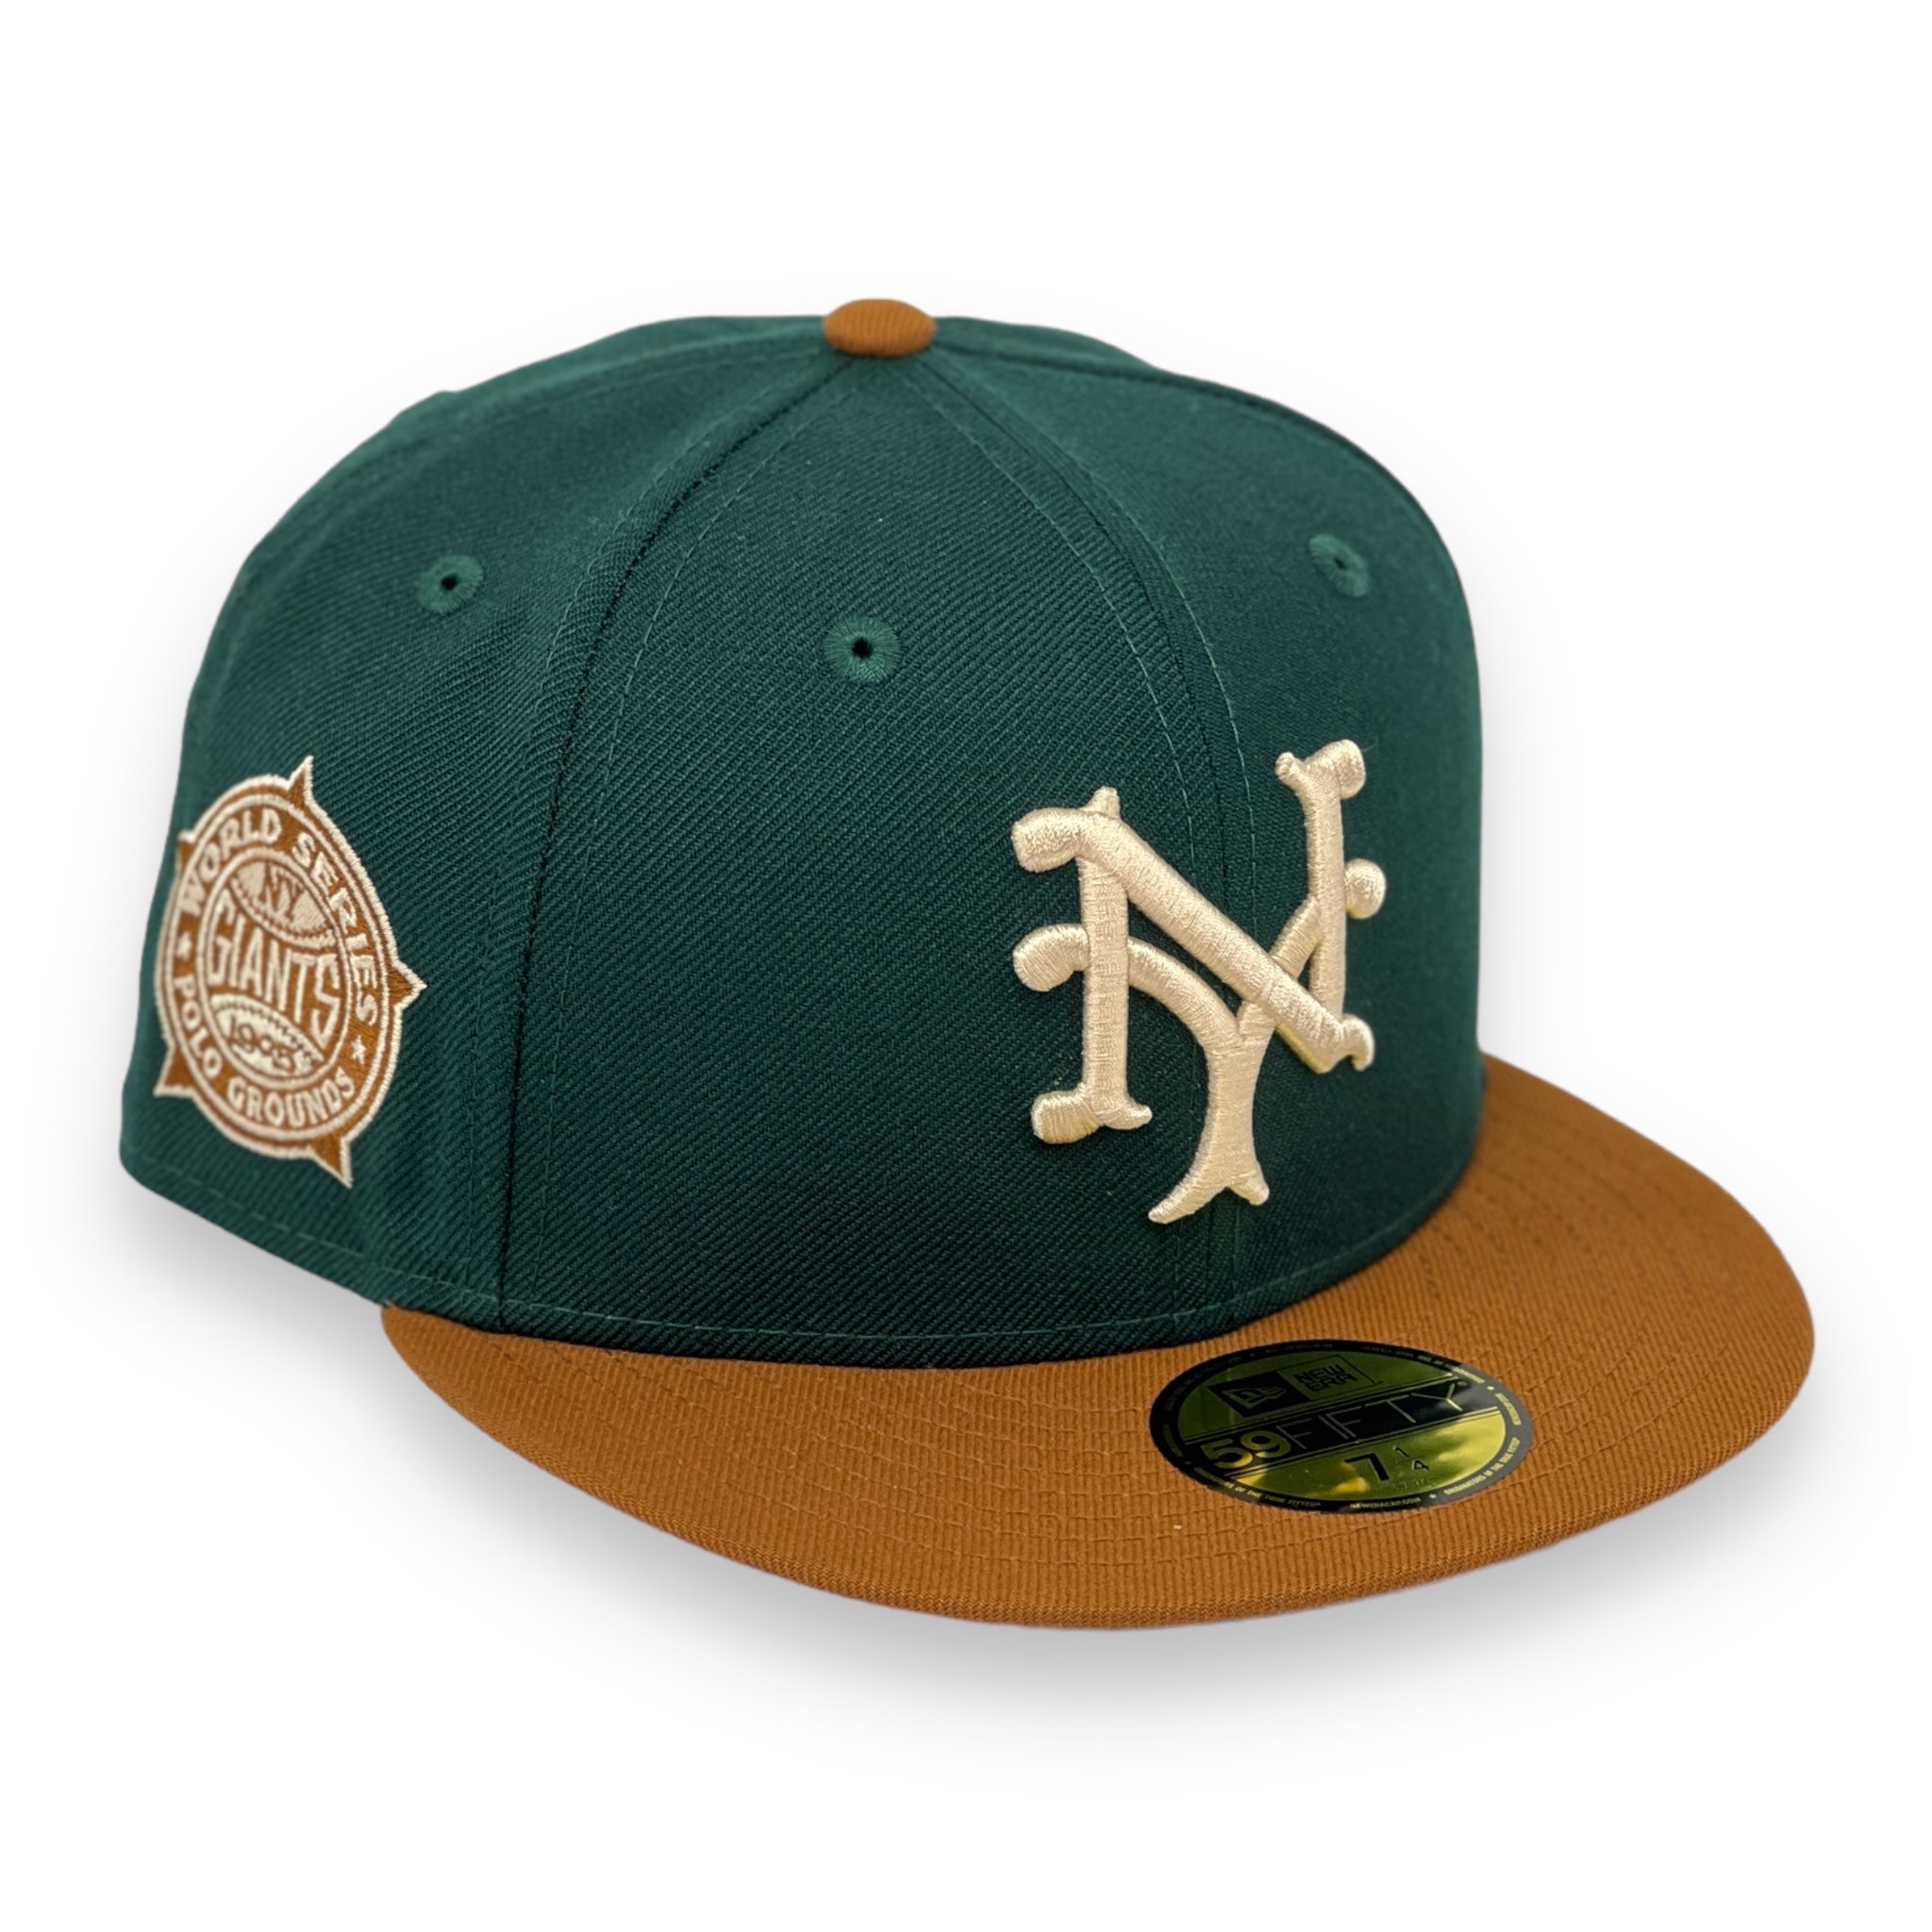 NEW YORK GIANTS (DK-GREEN) (1905 WS "POLO GROUNDS") NEW ERA 59FIFTY FITTED